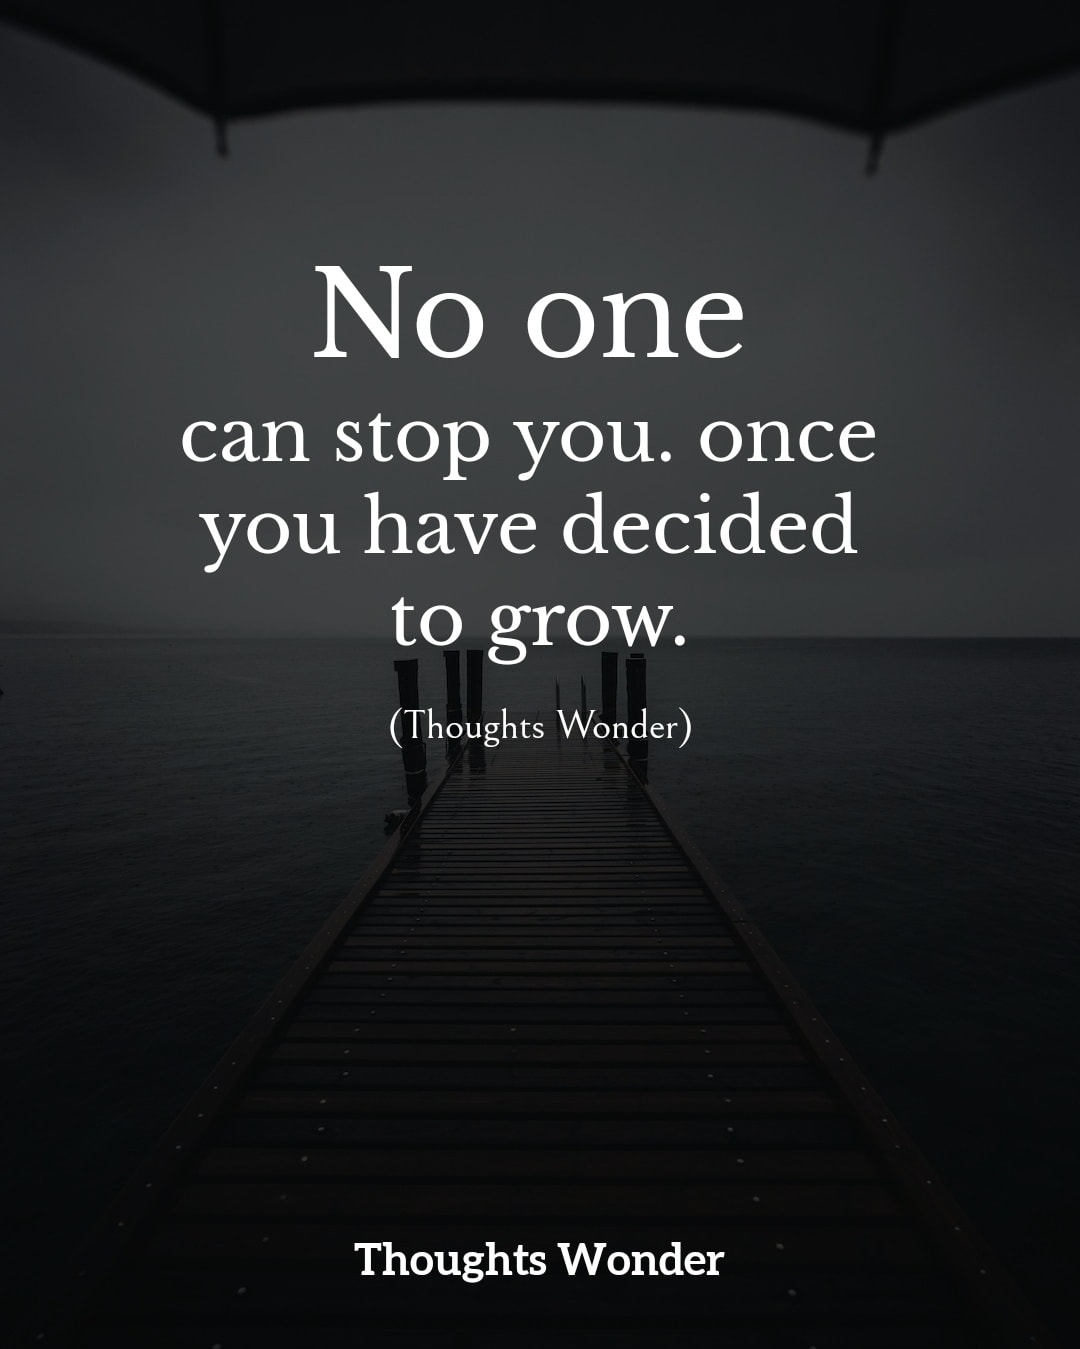 No one can stop you, once you have decided to grow.